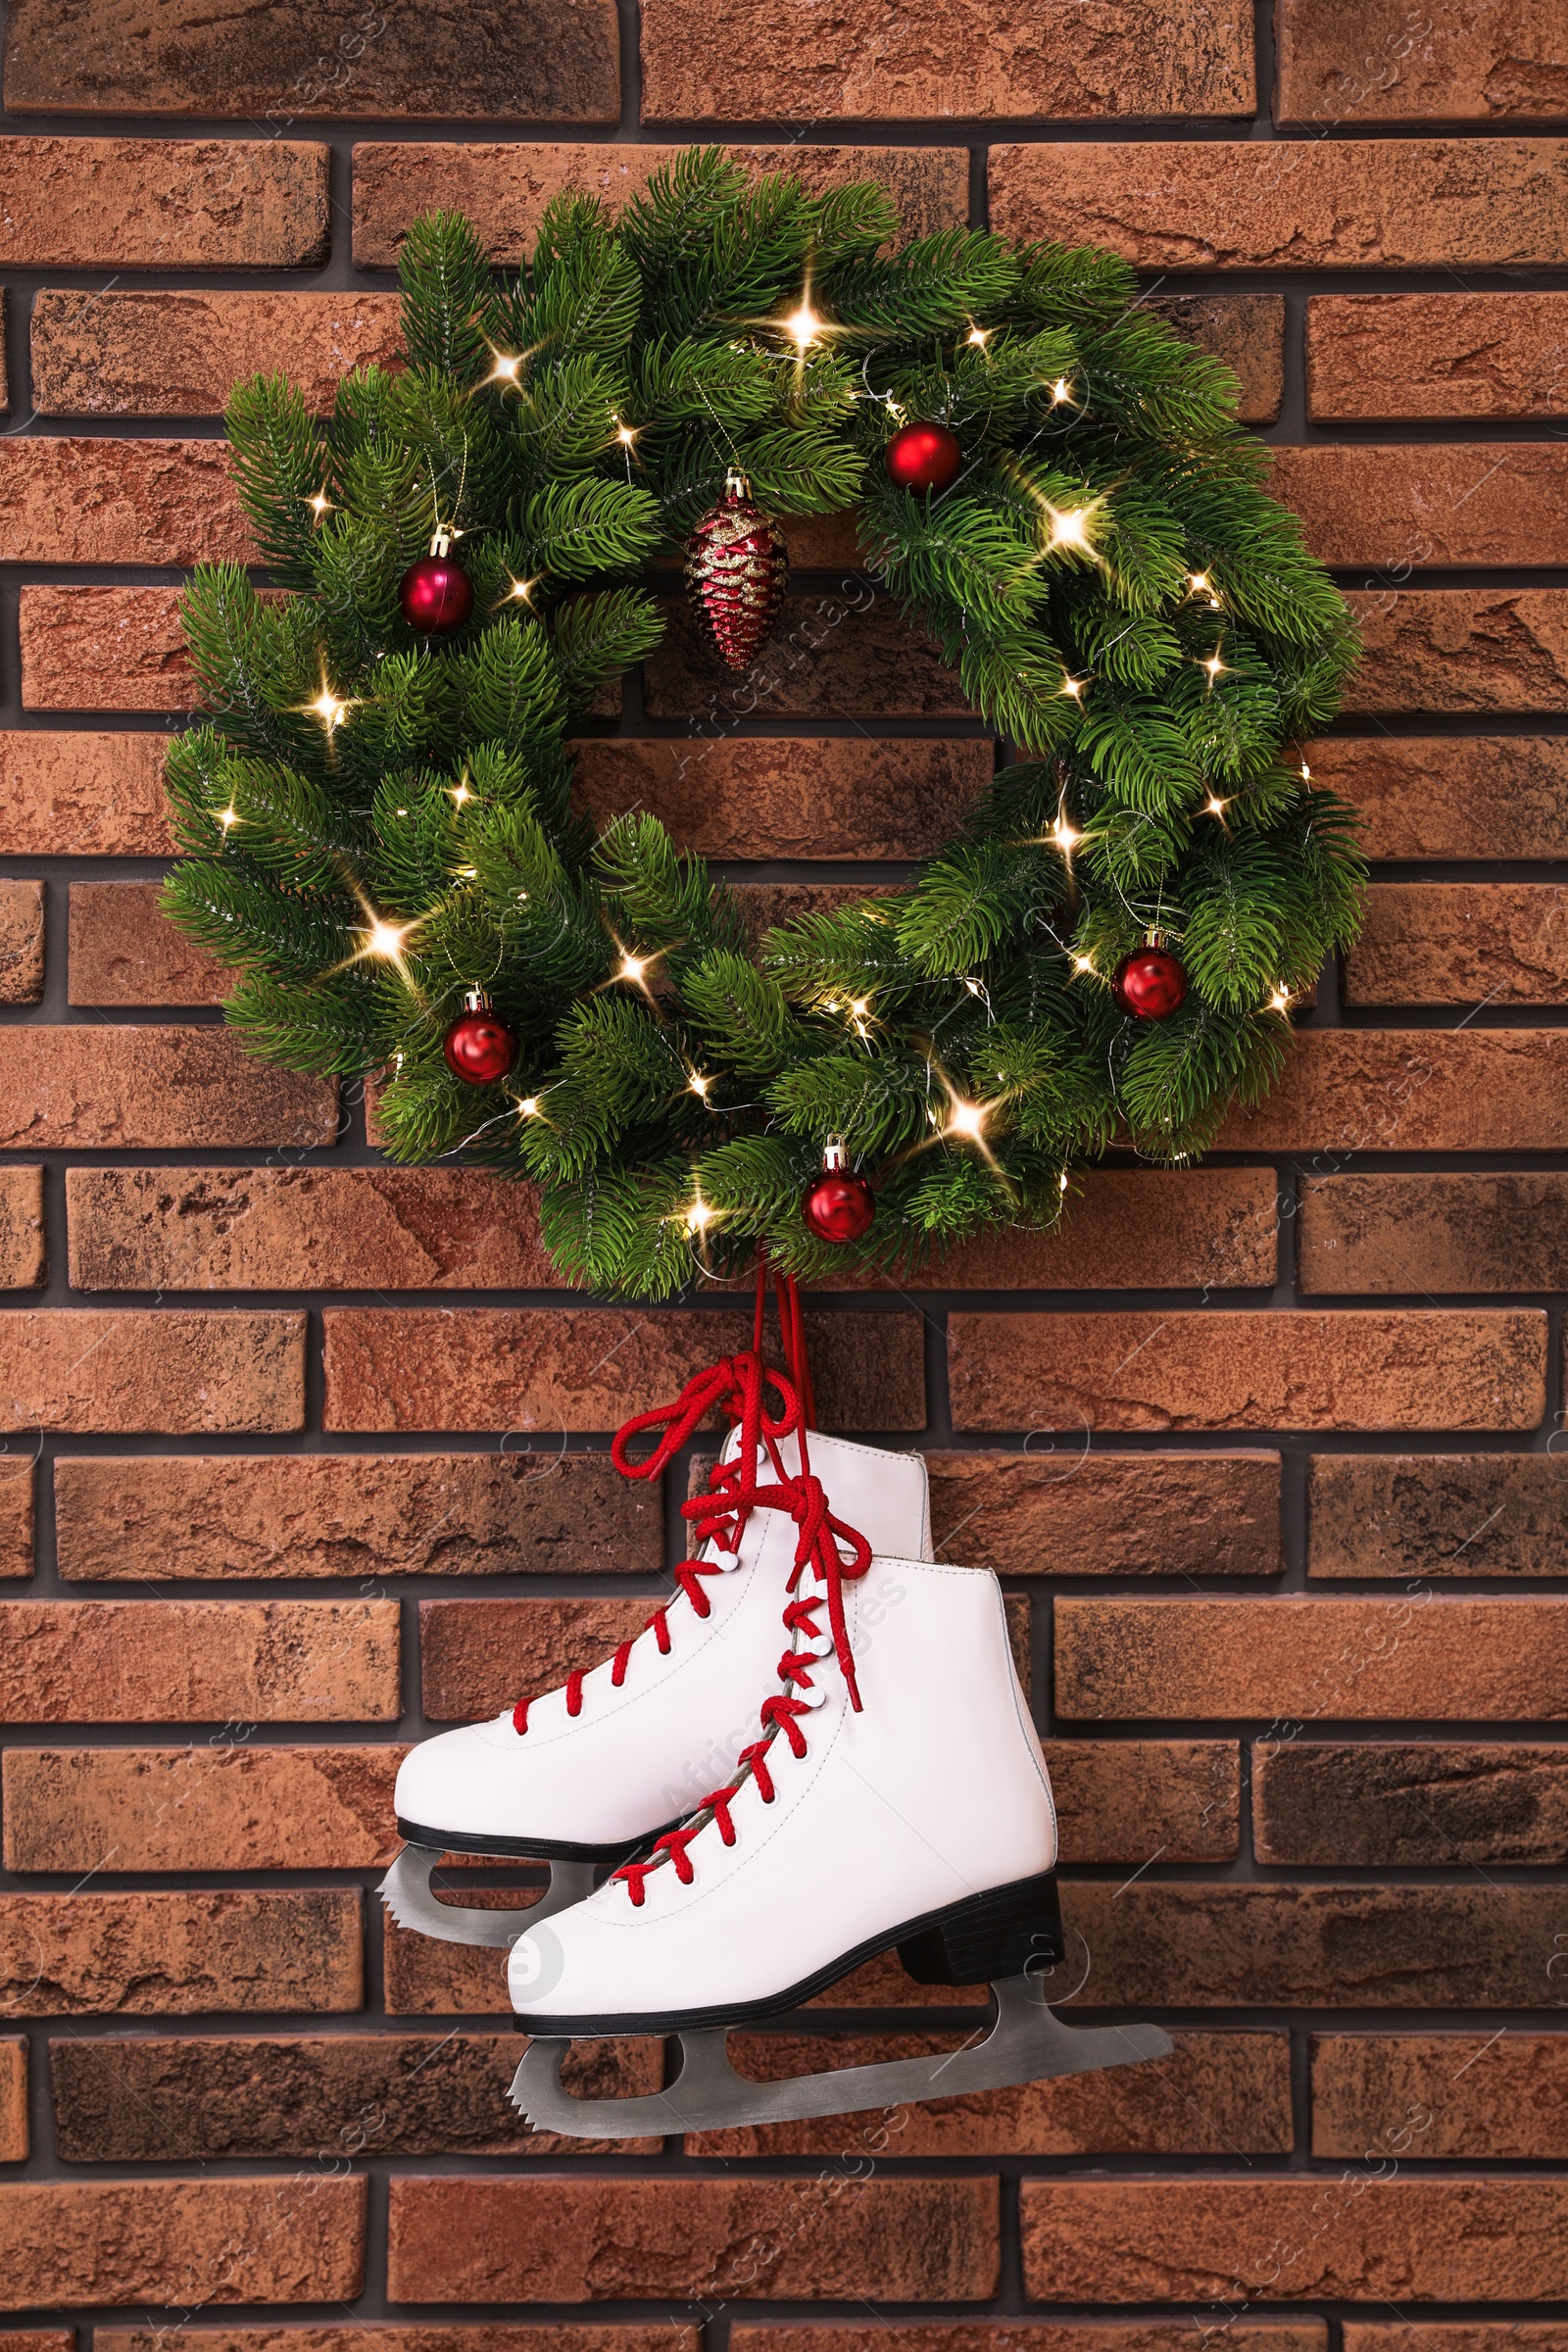 Photo of Pair of ice skates and beautiful Christmas wreath hanging on brick wall